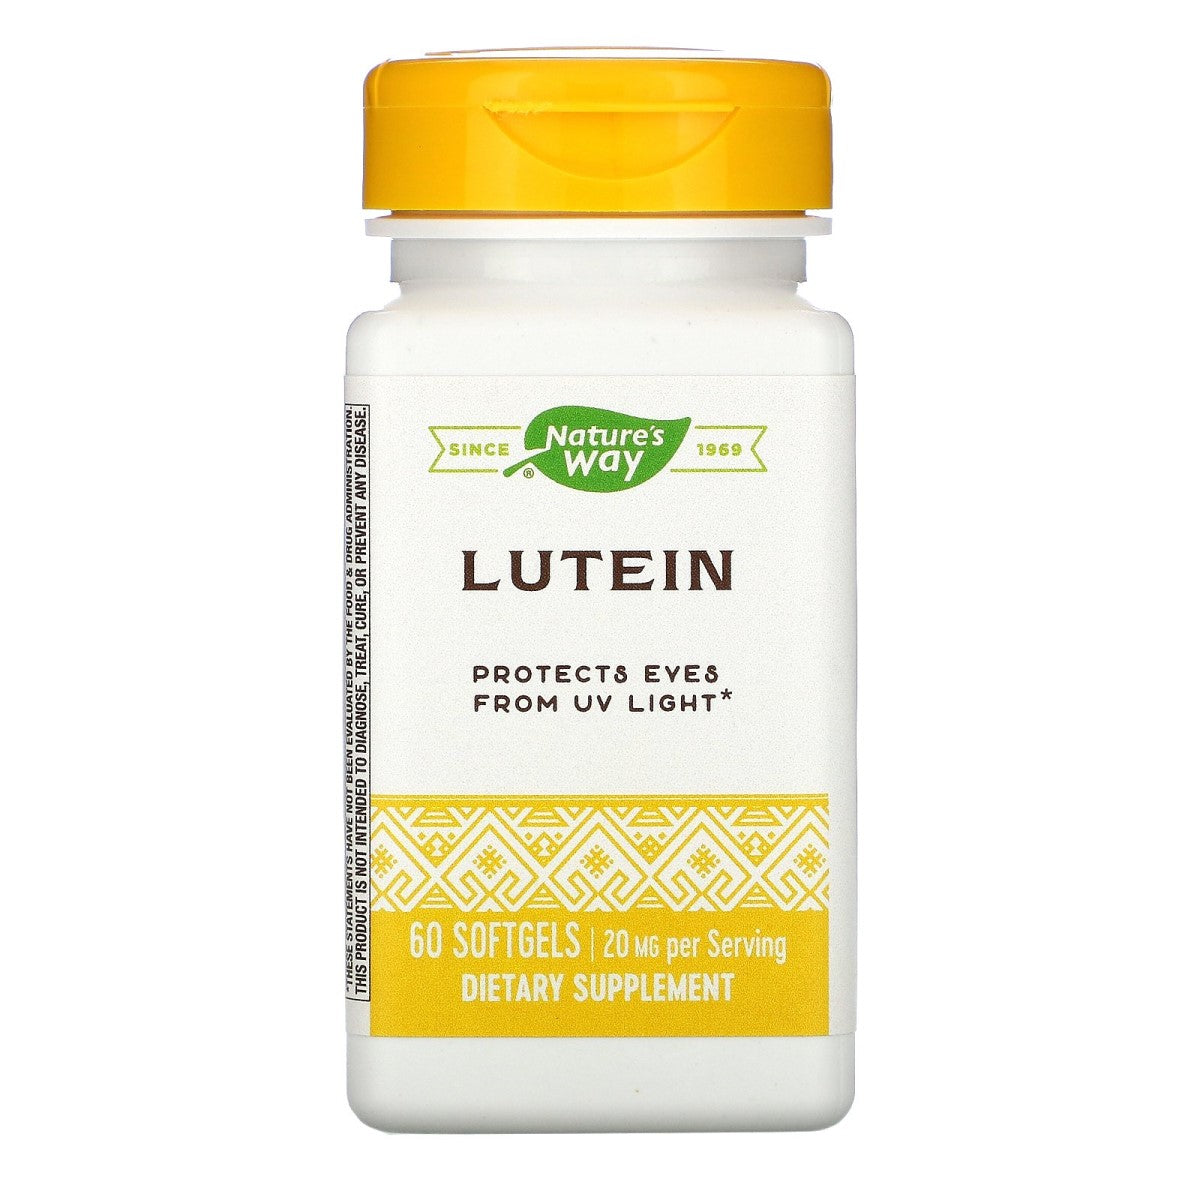 Primary image of Lutein